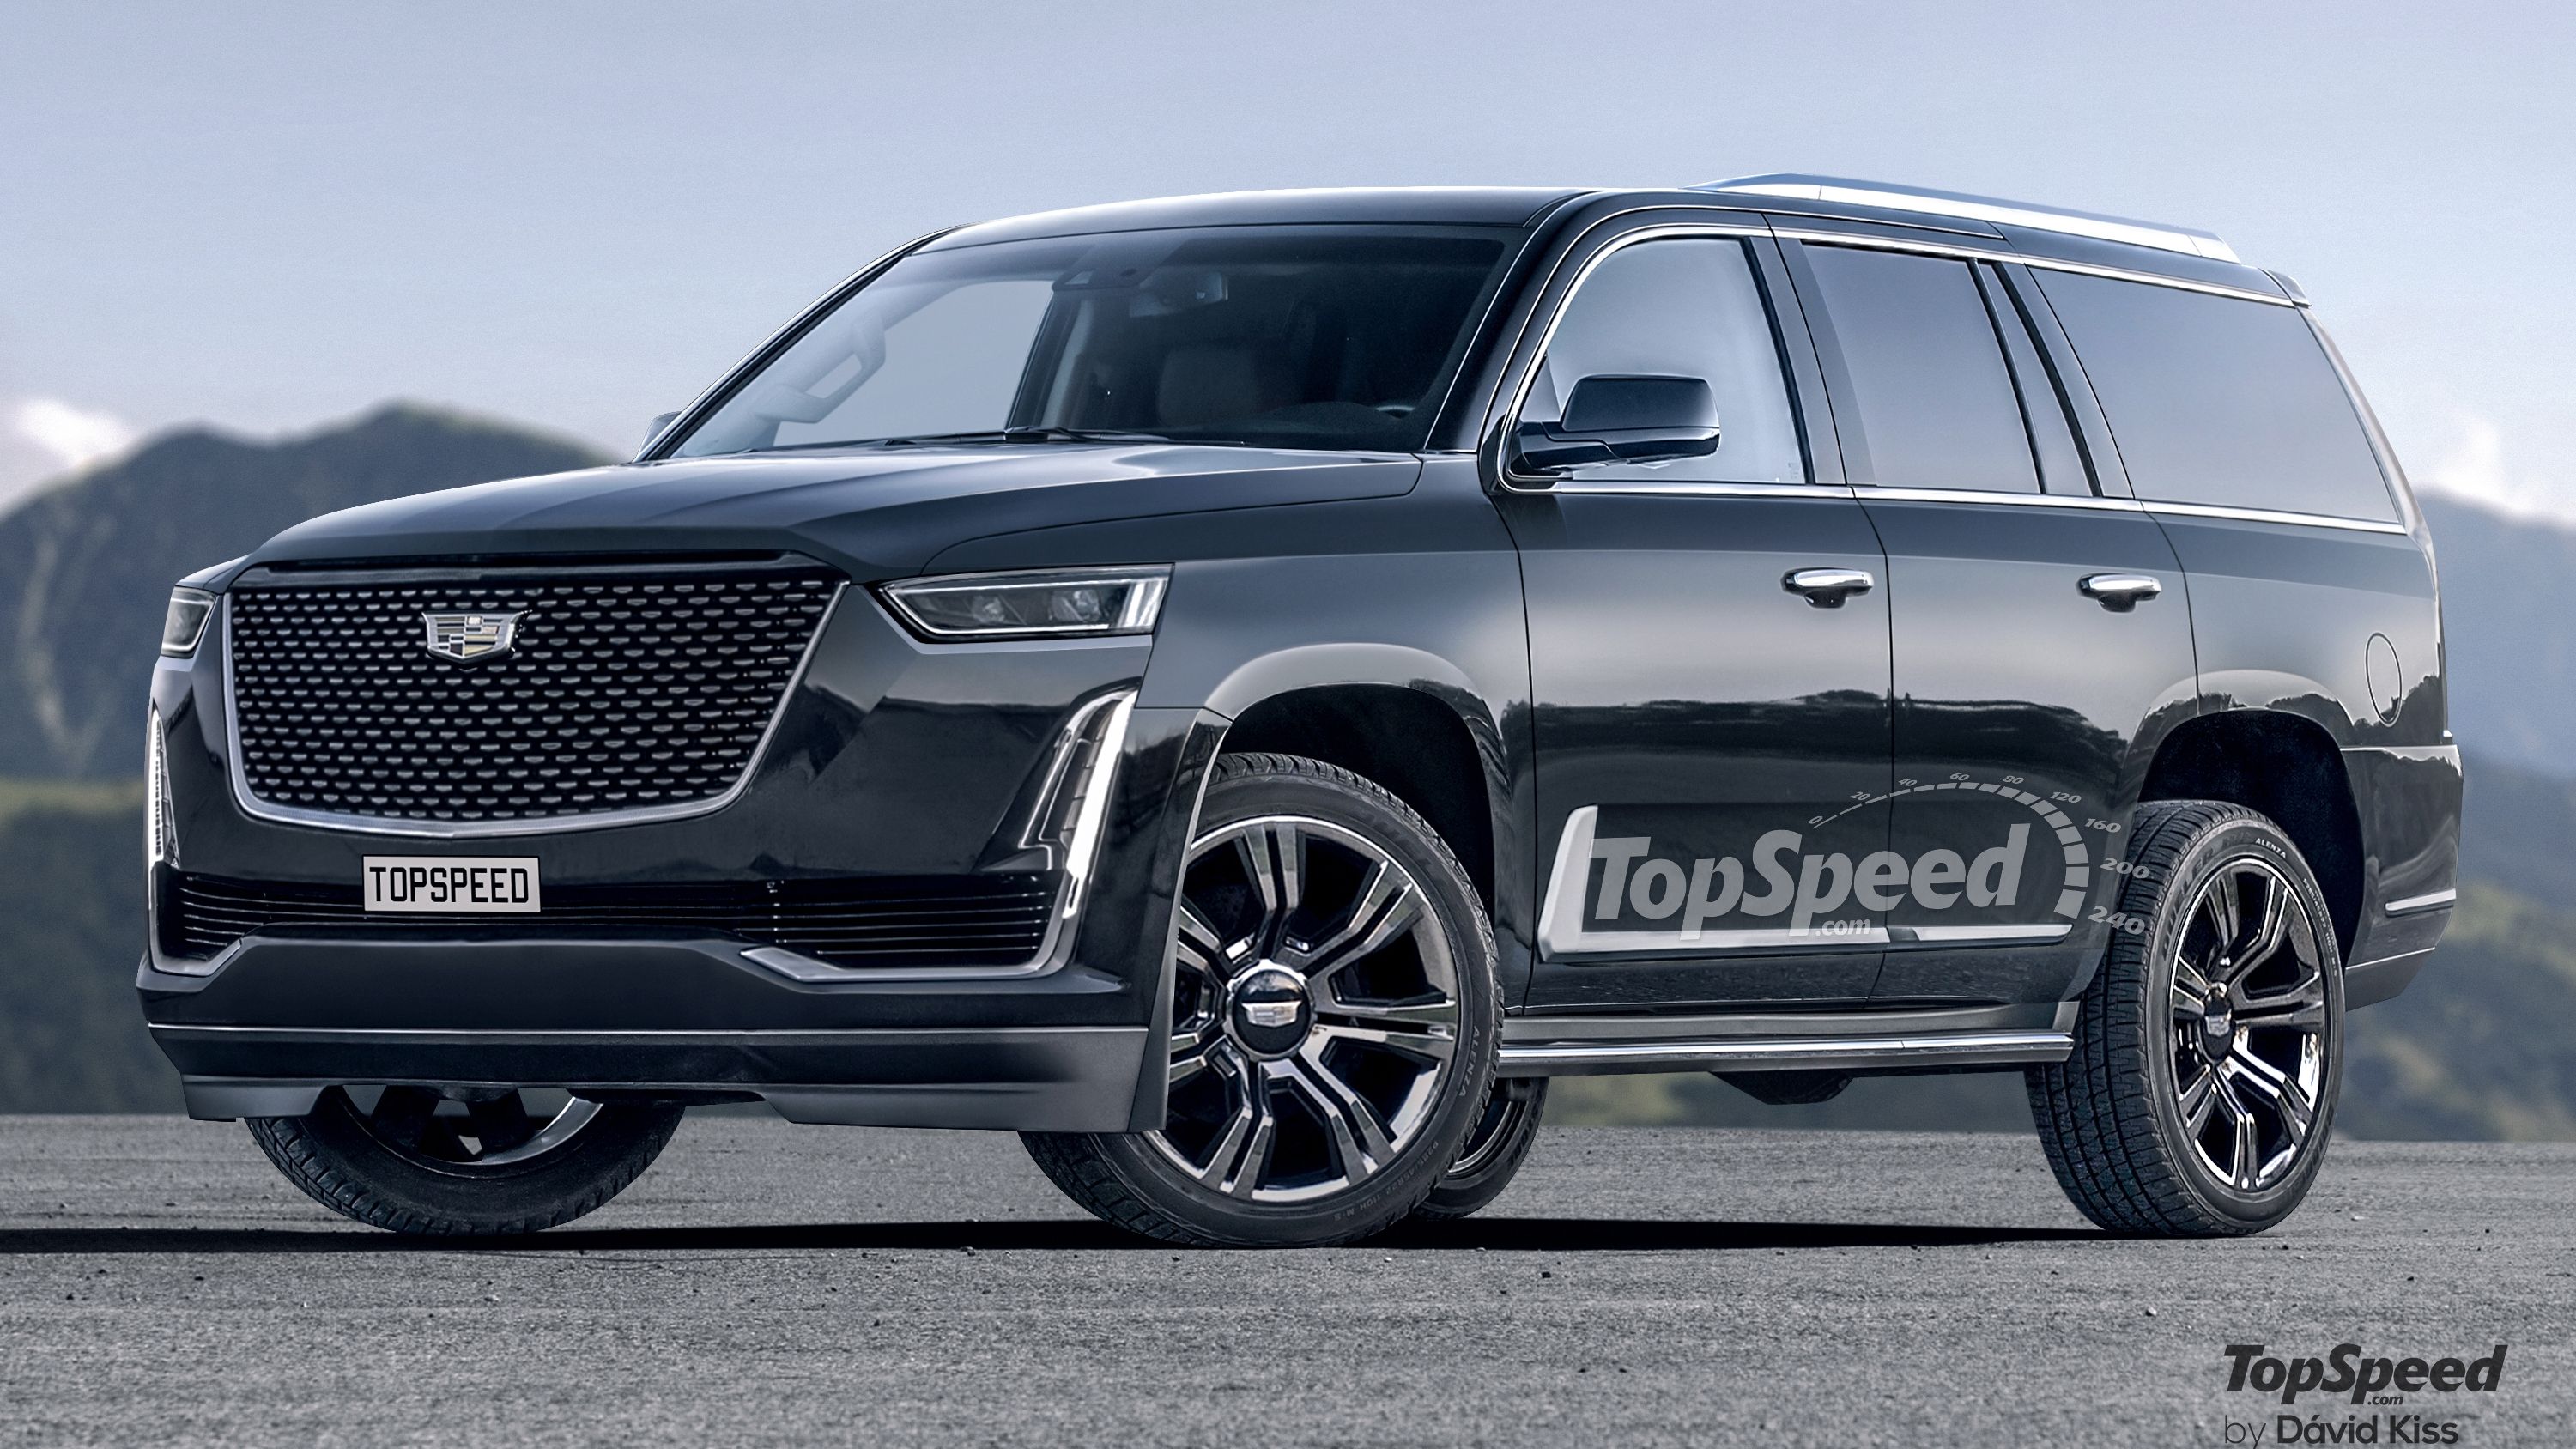 2018 - 2019 A Cadillac Escalade With the LT4 From the Chevy Corvette and Camaro? It Could Happen